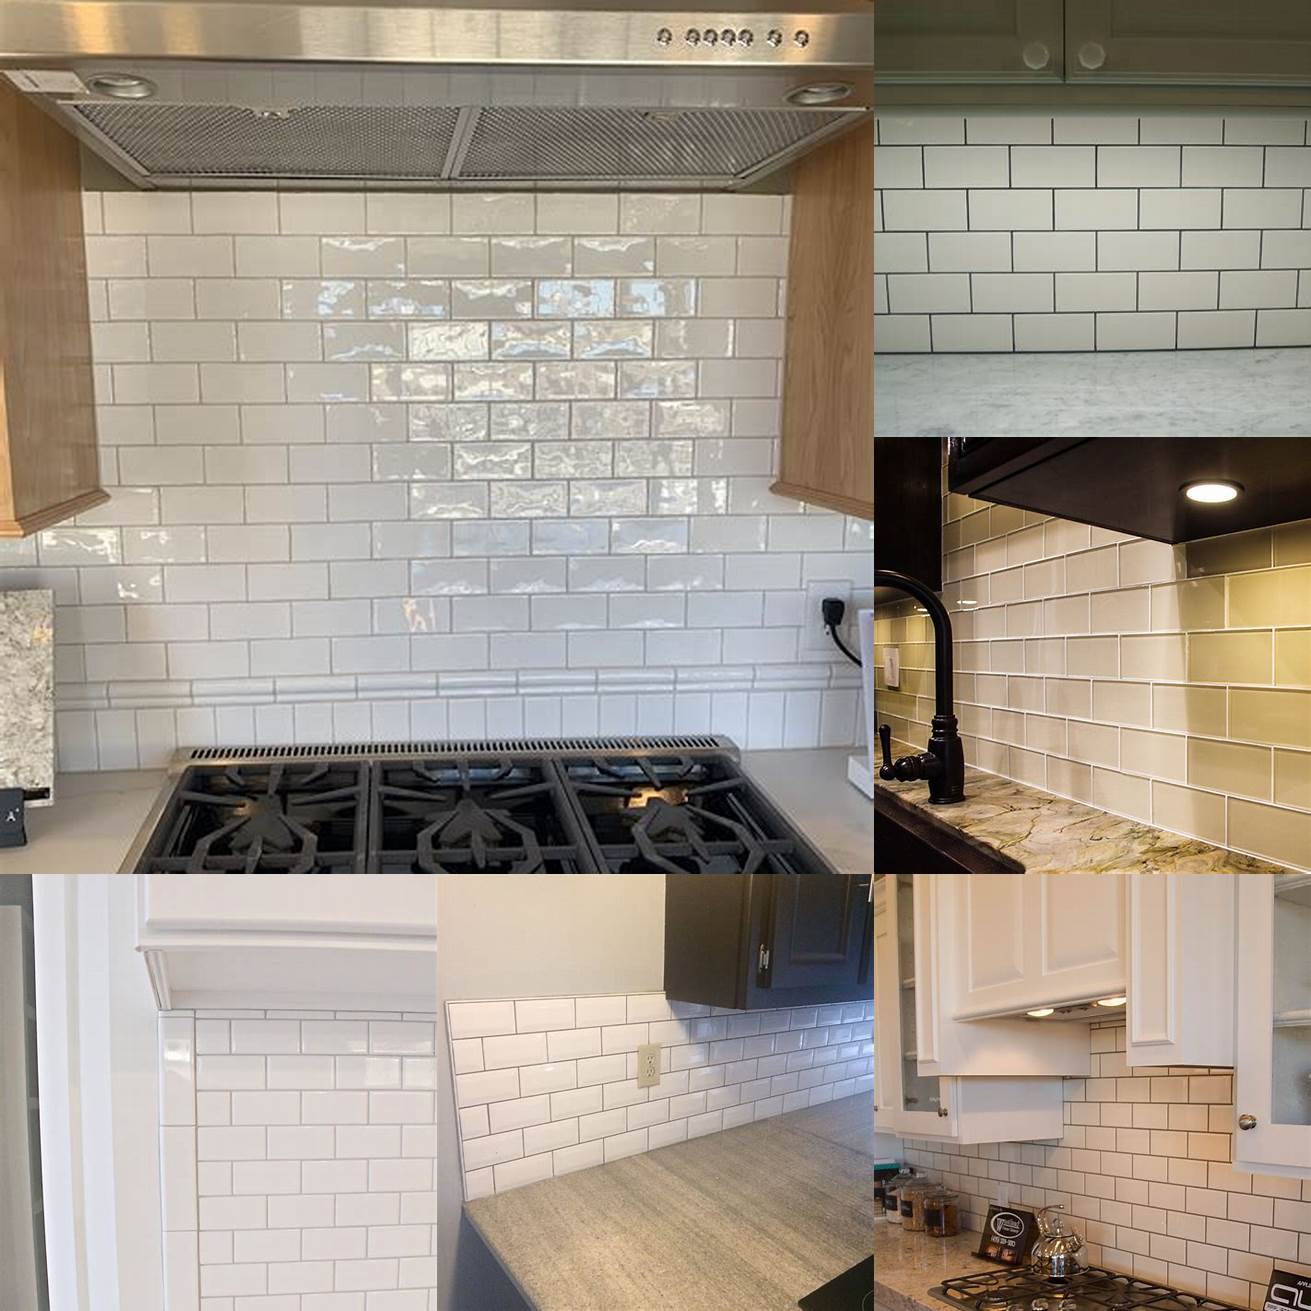 4 Subway Tile Kitchen with Colored Grout